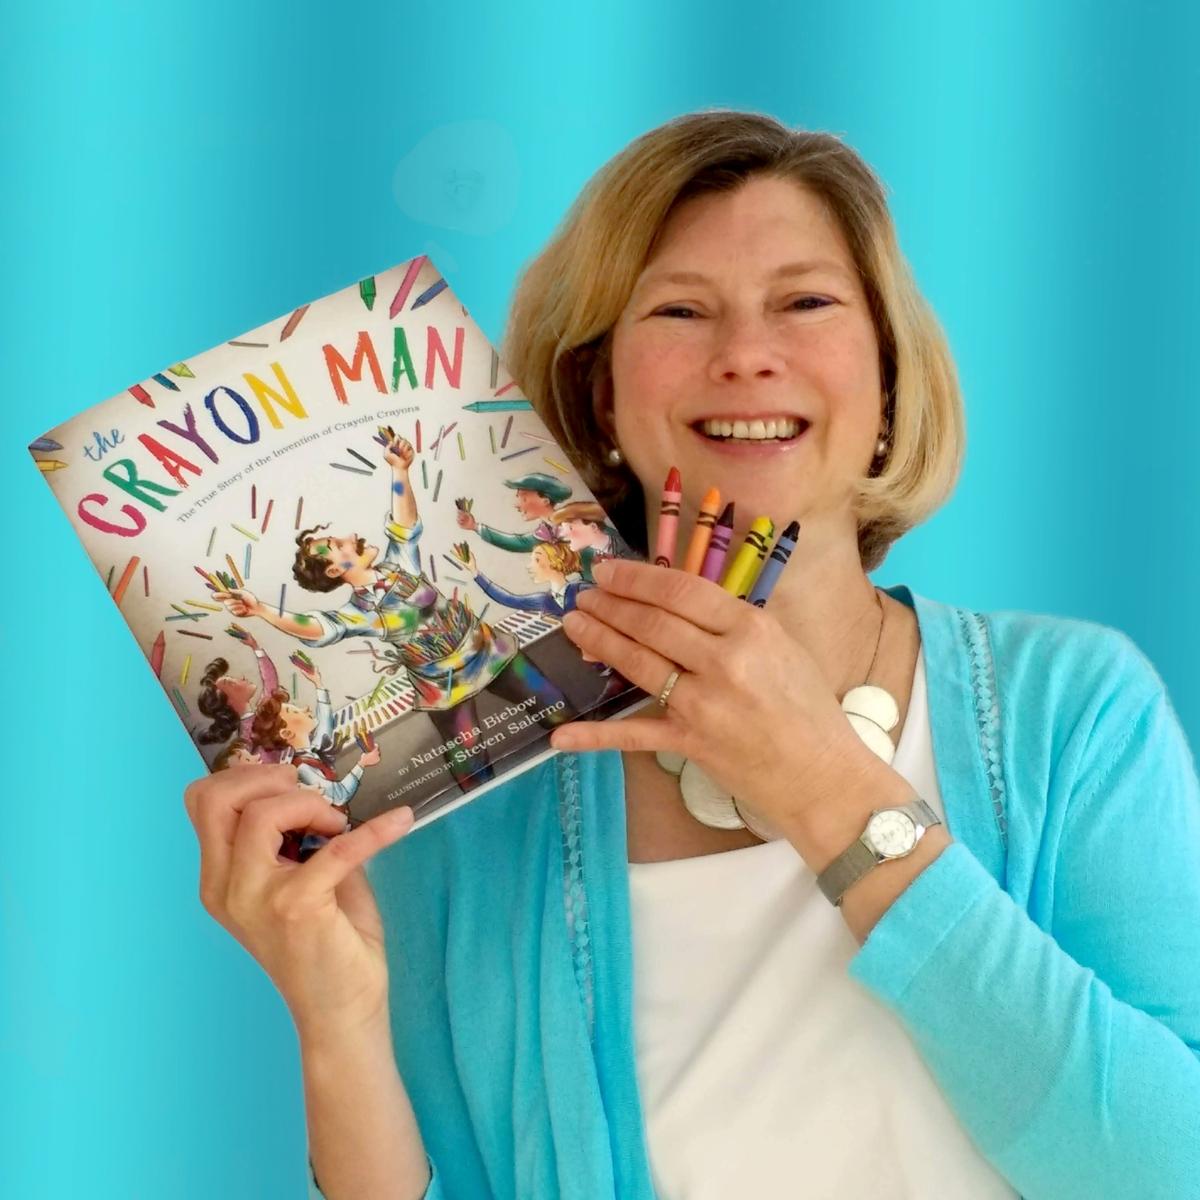 Virtual Author Visit 'The Crayon Man' by Natascha Biebow